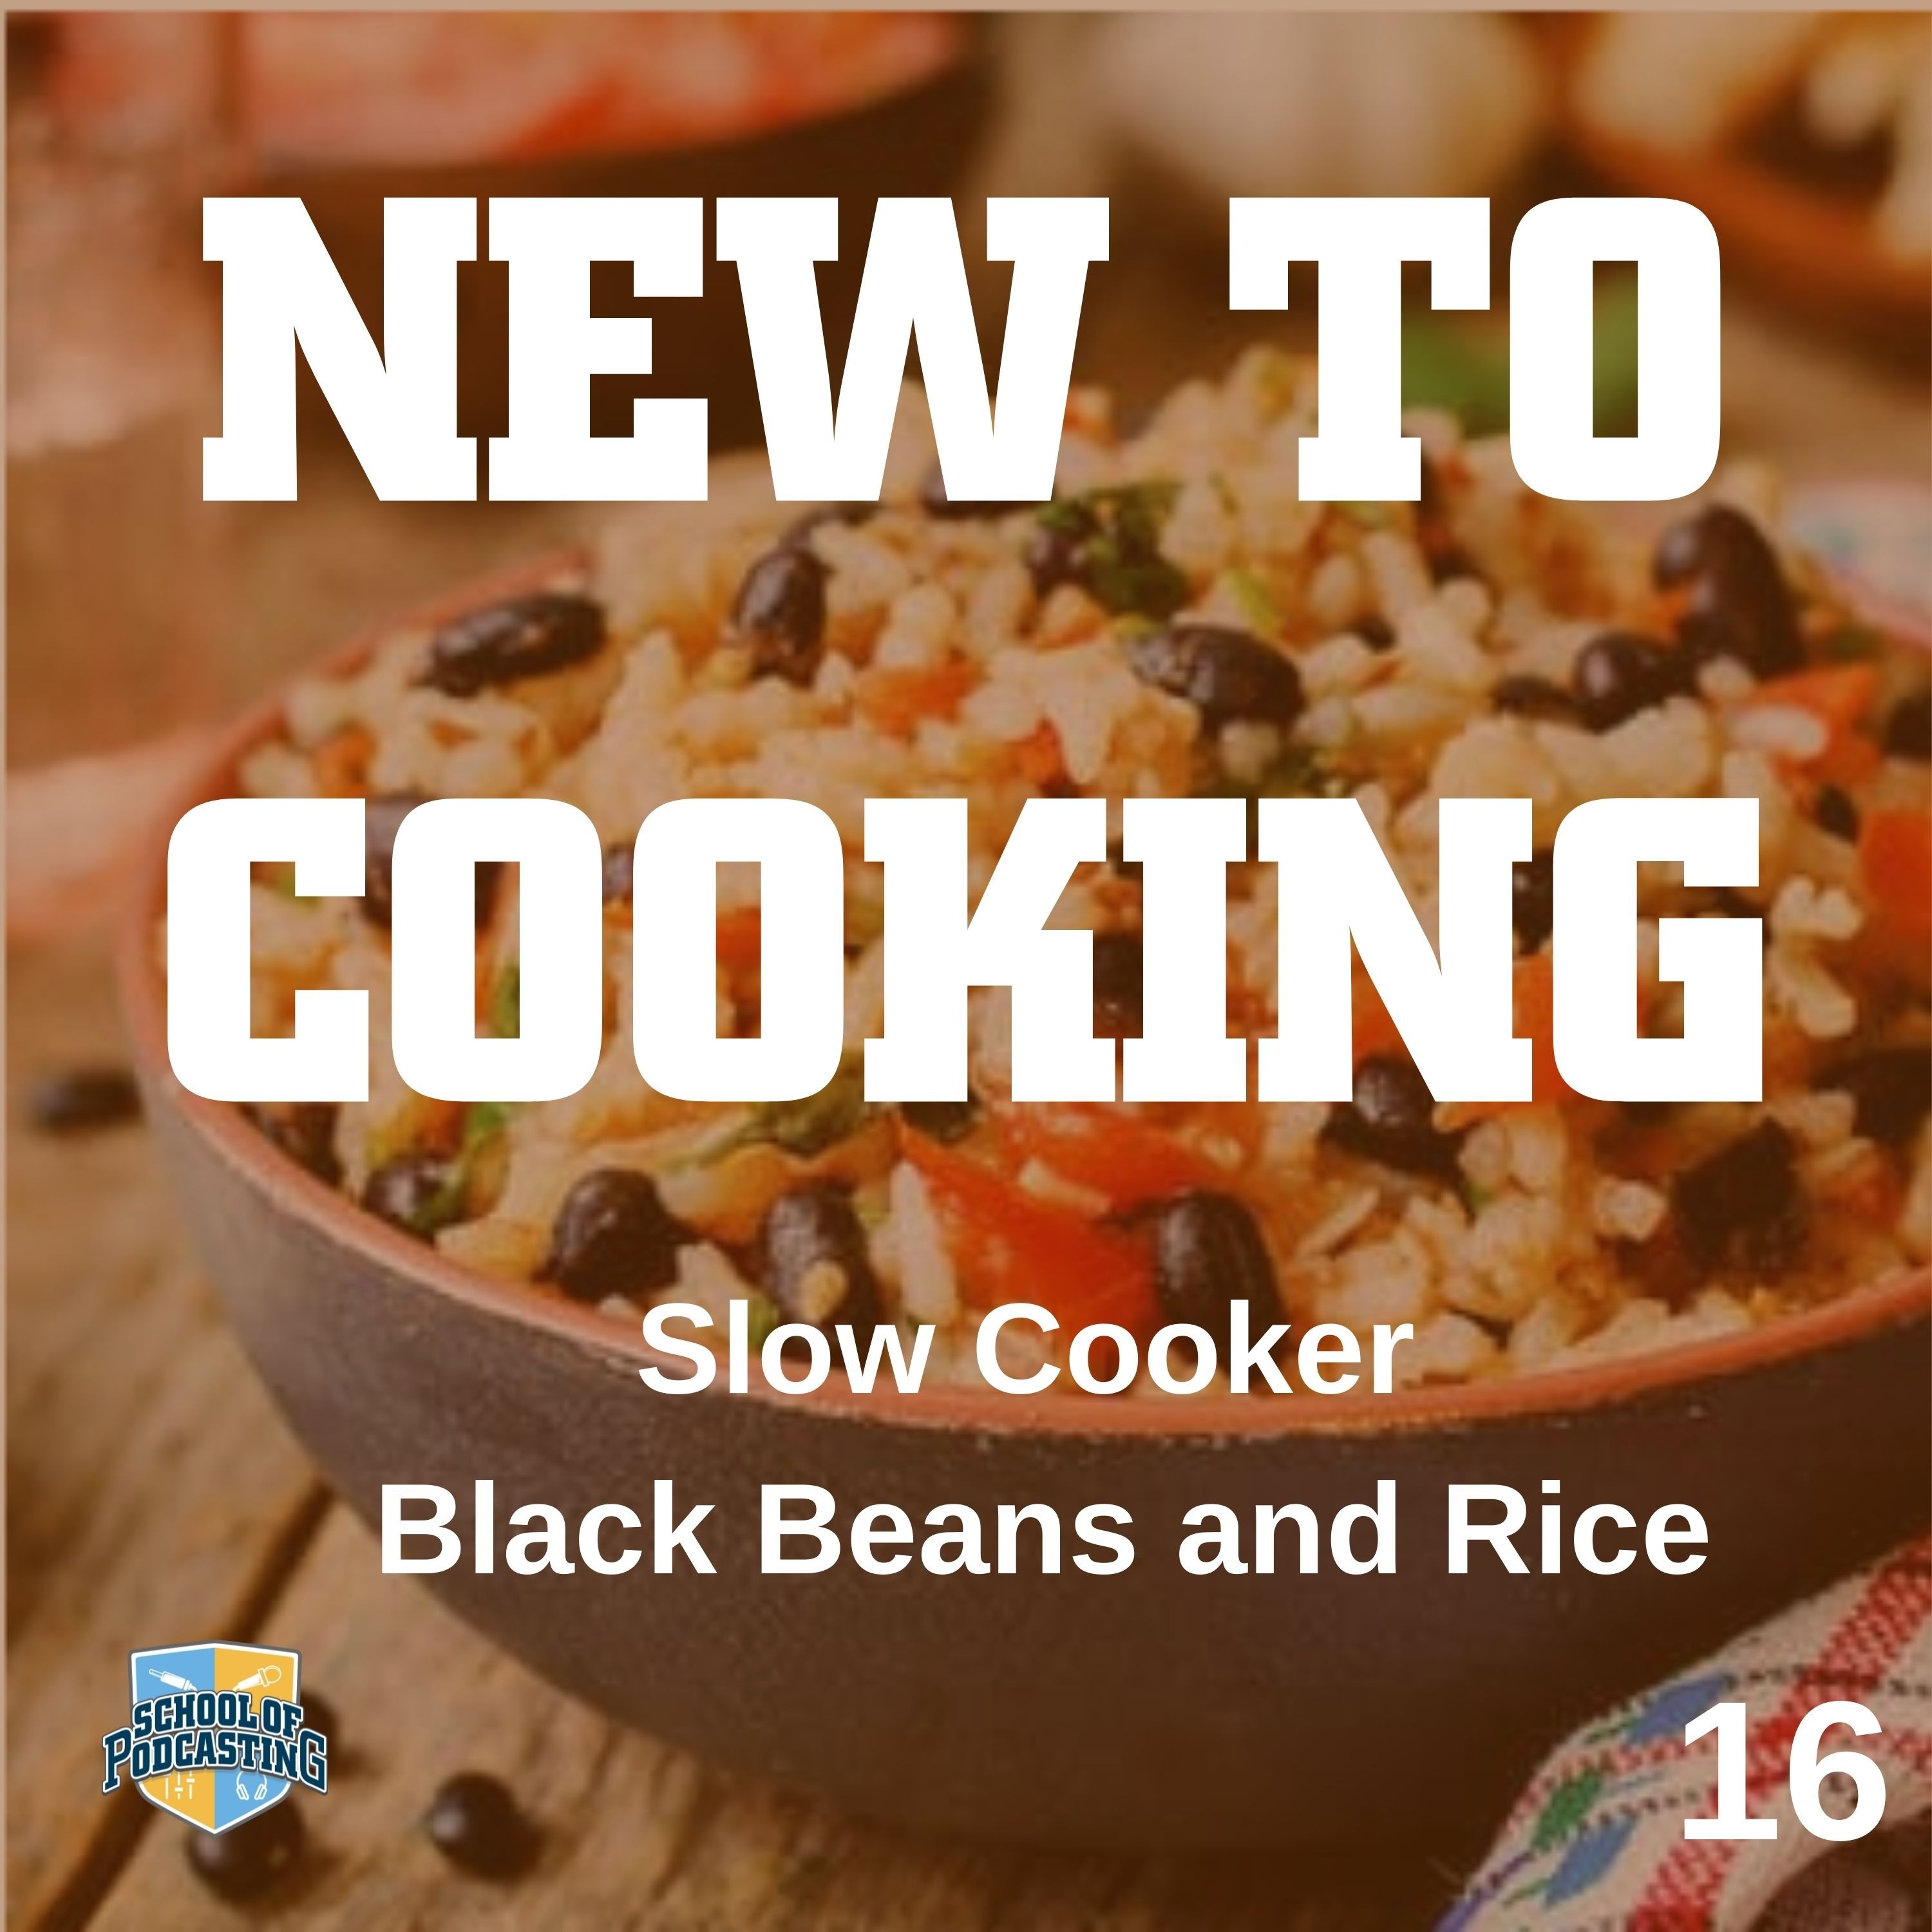 Slow Cooker Black Beans and Rice Image